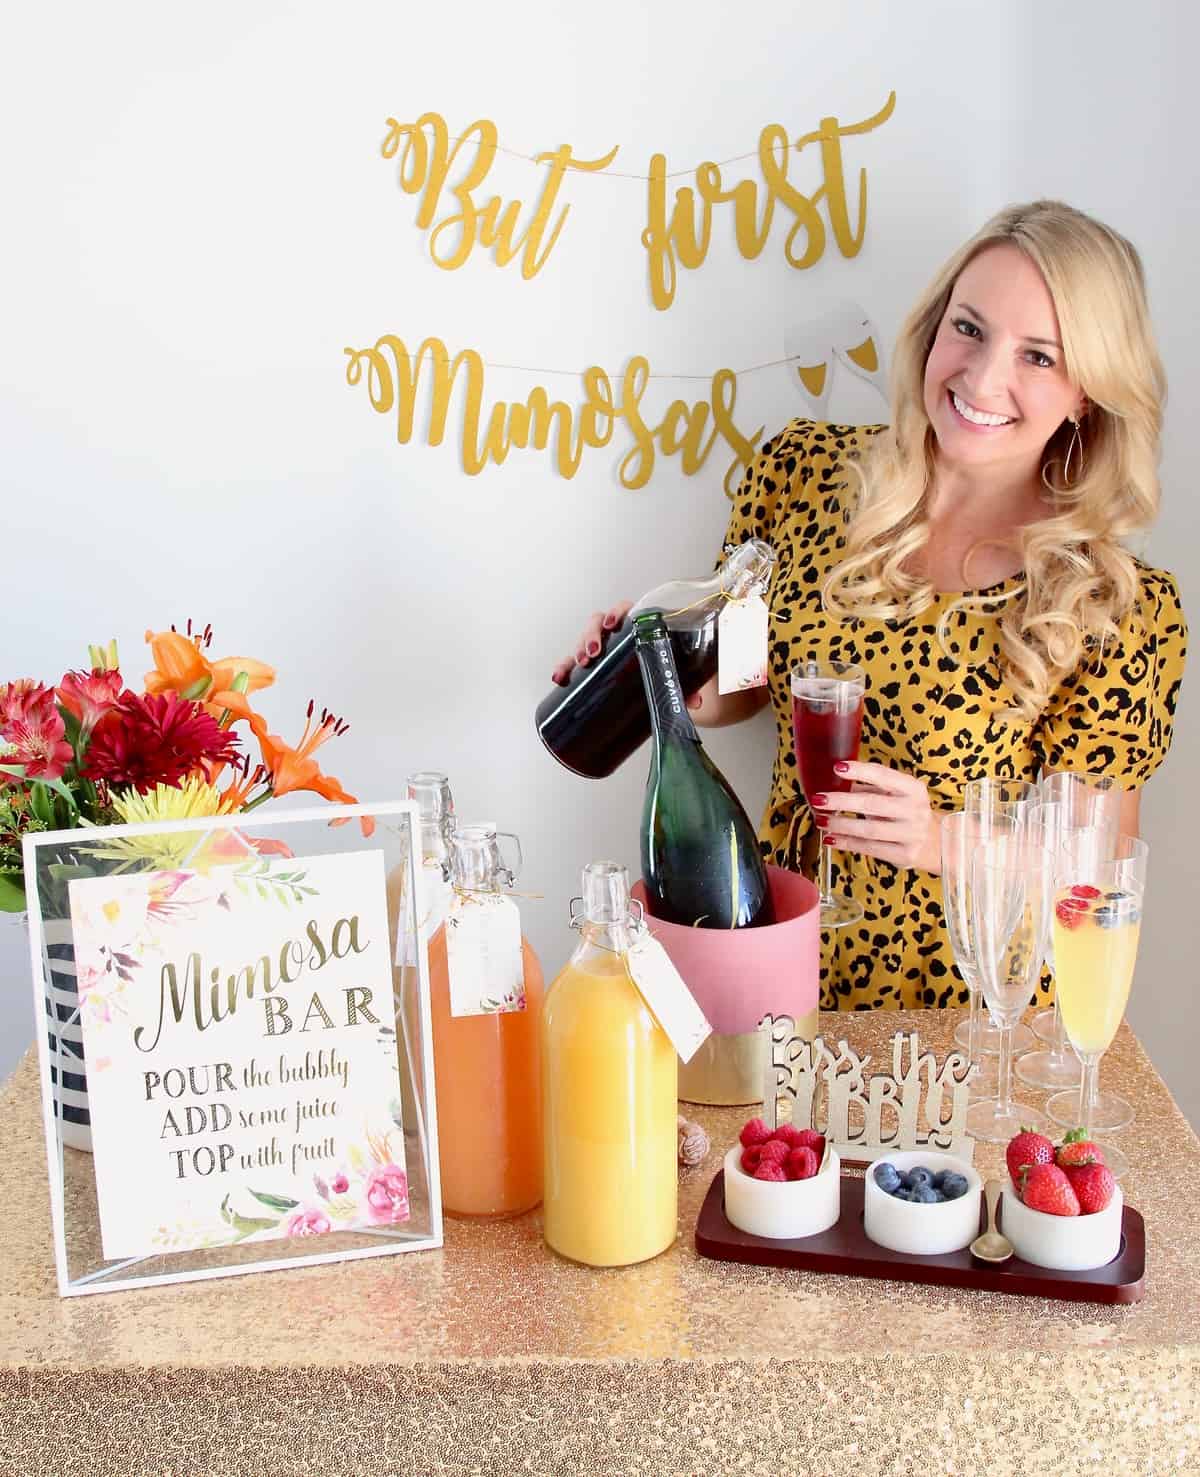 Woman pouring juice into a mimosa standing behind a mimosa bar